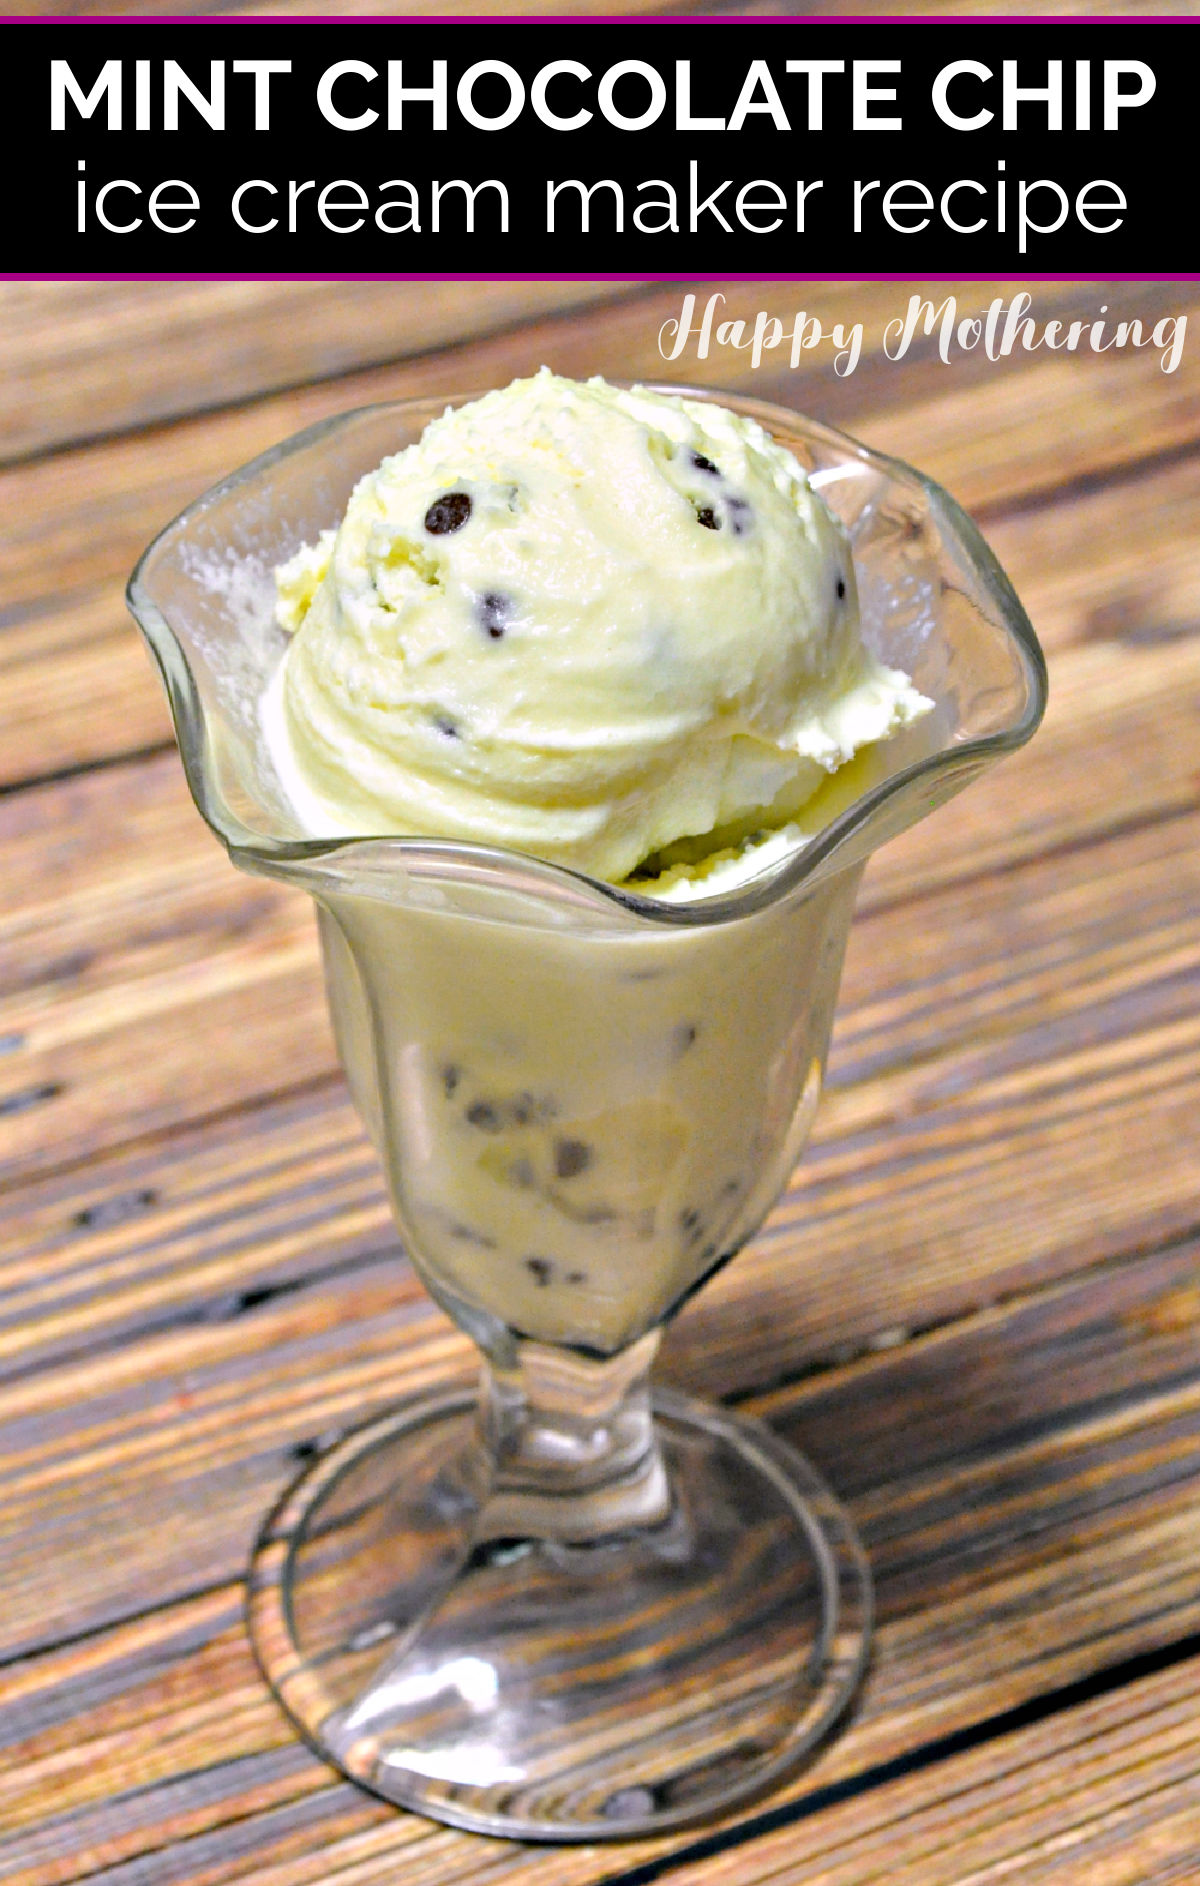 Mint chocolate chip is a favorite ice cream flavor in our family. Learn the best recipe for making this sweet treat. We even included a dairy free option!